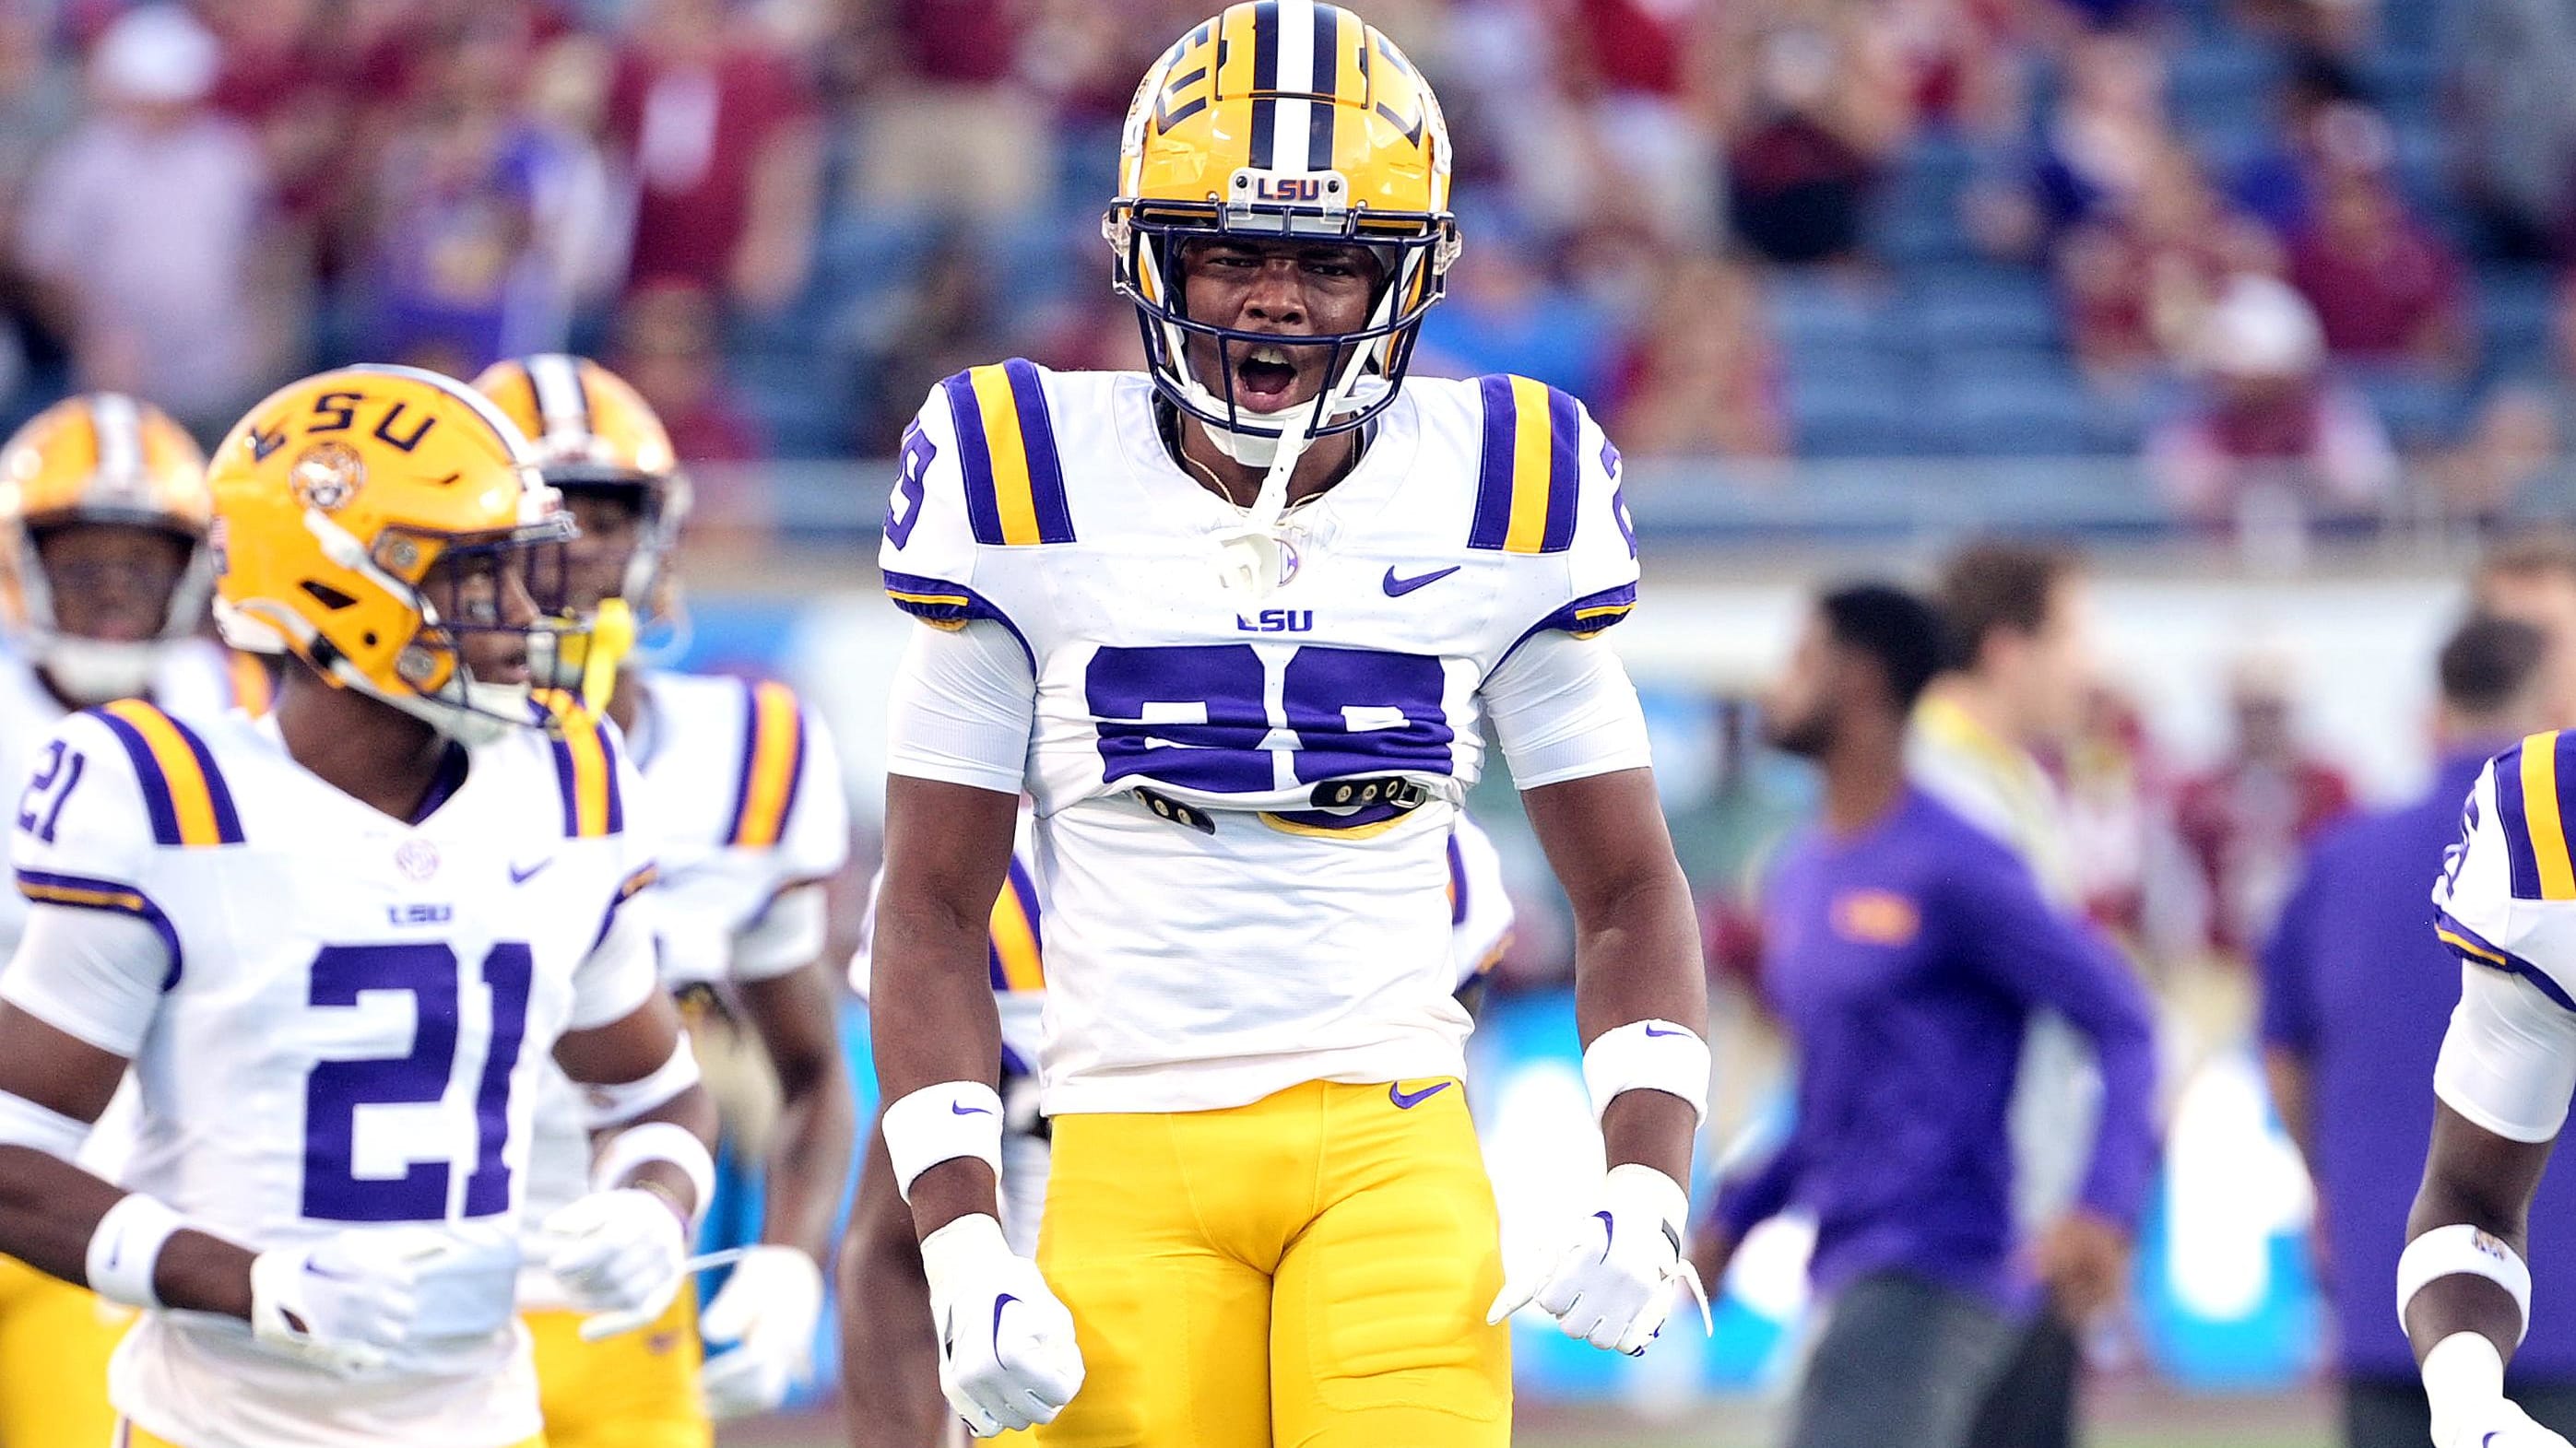 LSU Football Roster Restructure: Trio of Young Tigers Enter Transfer Portal